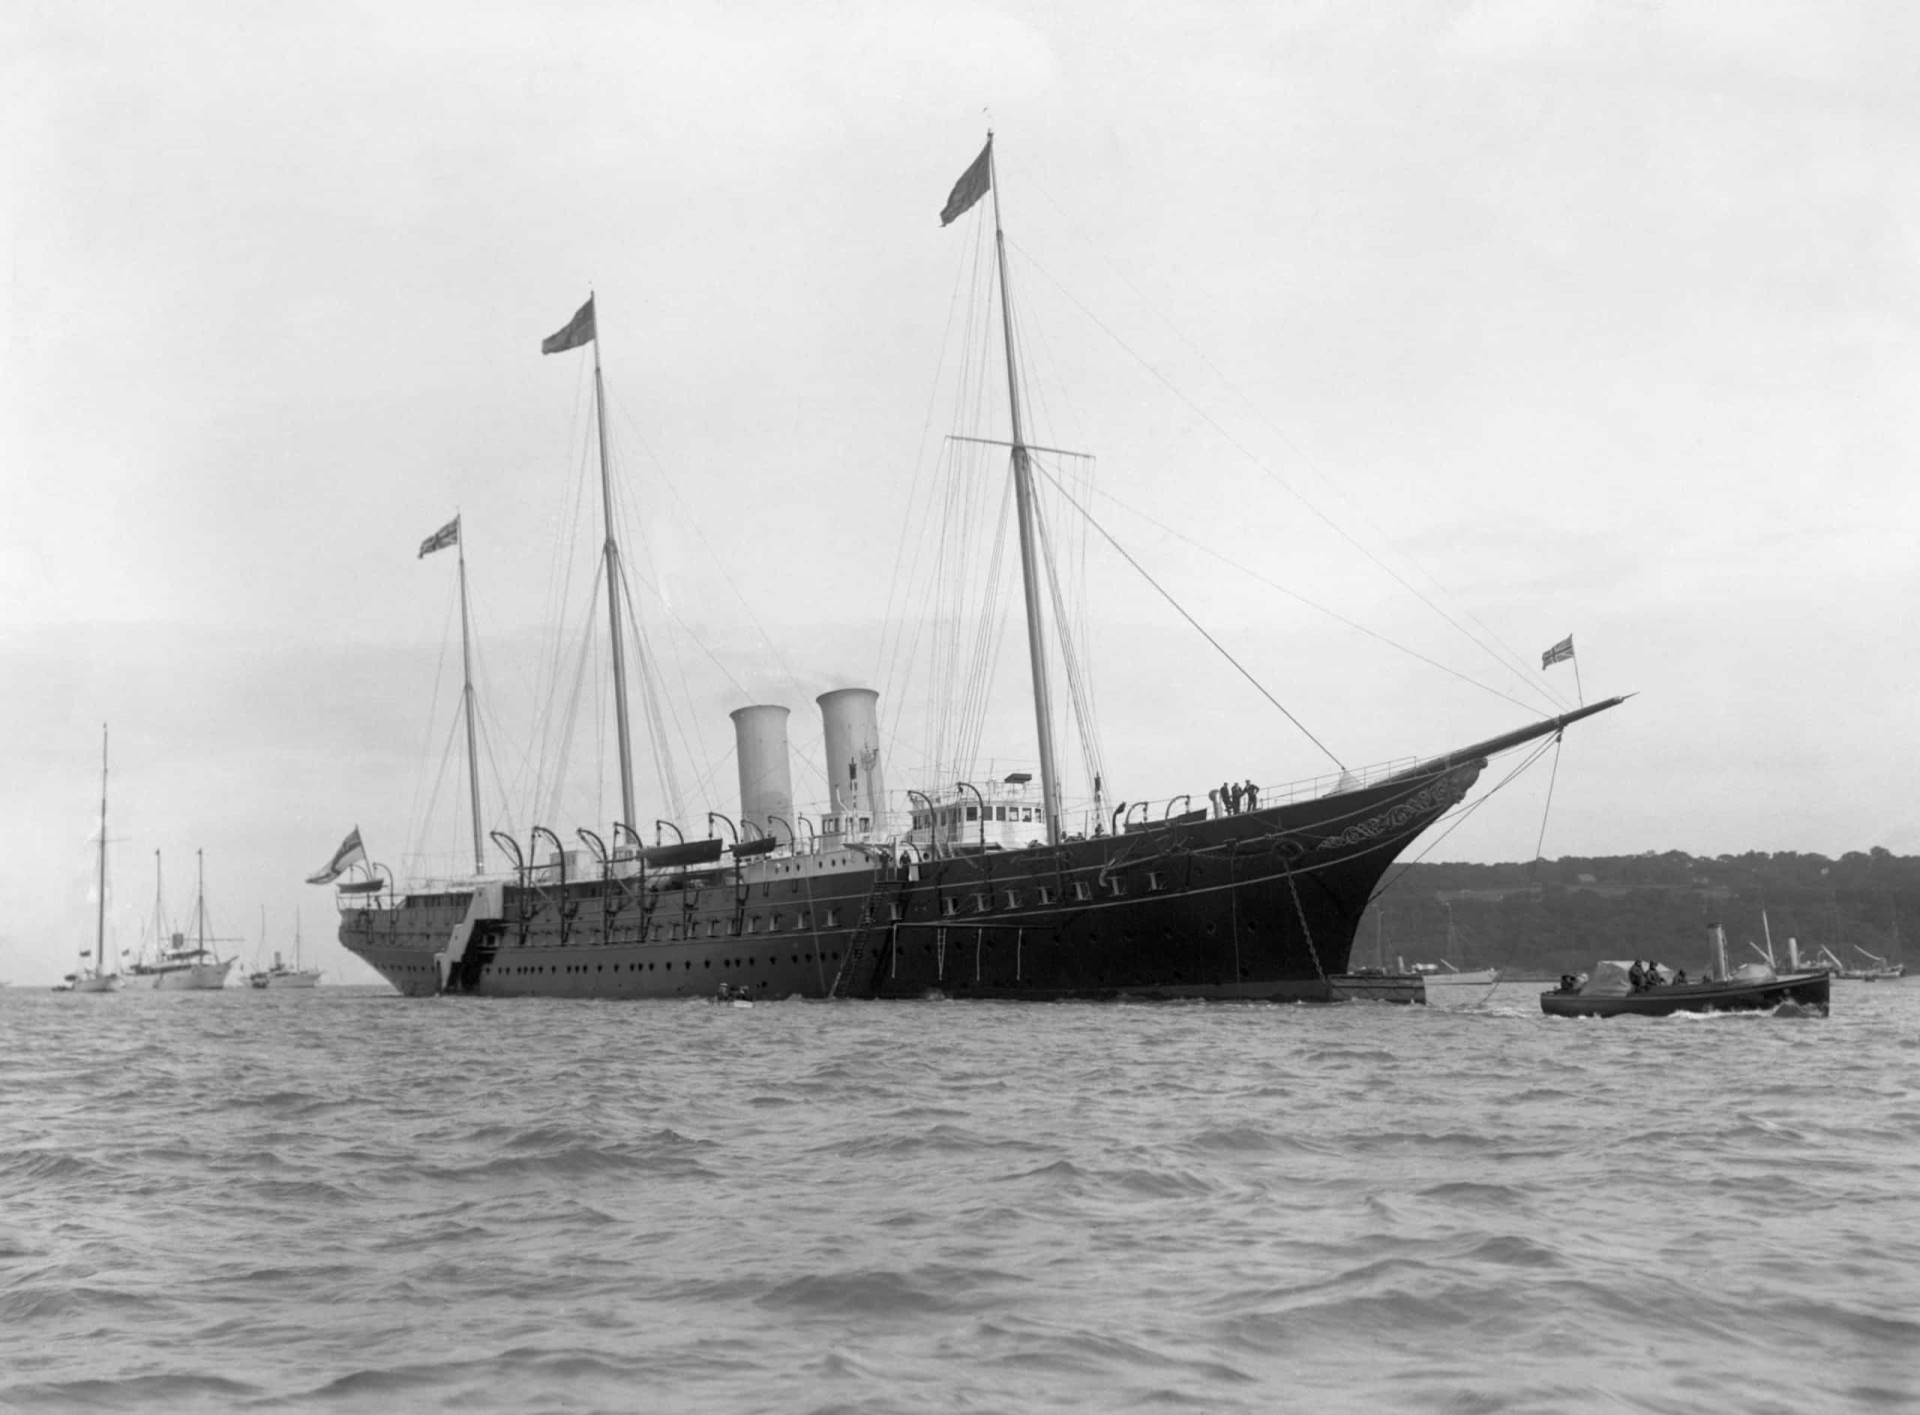 <p><em>Britannia</em>'s predecessor, HMY <em>Victoria and Albert III</em>, is pictured at anchor in the Solent off Portsmouth harbor. Built for Queen <a href="https://www.starsinsider.com/lifestyle/226263/incredible-photos-from-the-victorian-era" rel="noopener">Victoria</a>, this was the first royal yacht not to be powered by sail. She was decommissioned in 1939.</p><p><a href="https://www.msn.com/en-us/community/channel/vid-7xx8mnucu55yw63we9va2gwr7uihbxwc68fxqp25x6tg4ftibpra?cvid=94631541bc0f4f89bfd59158d696ad7e">Follow us and access great exclusive content every day</a></p>